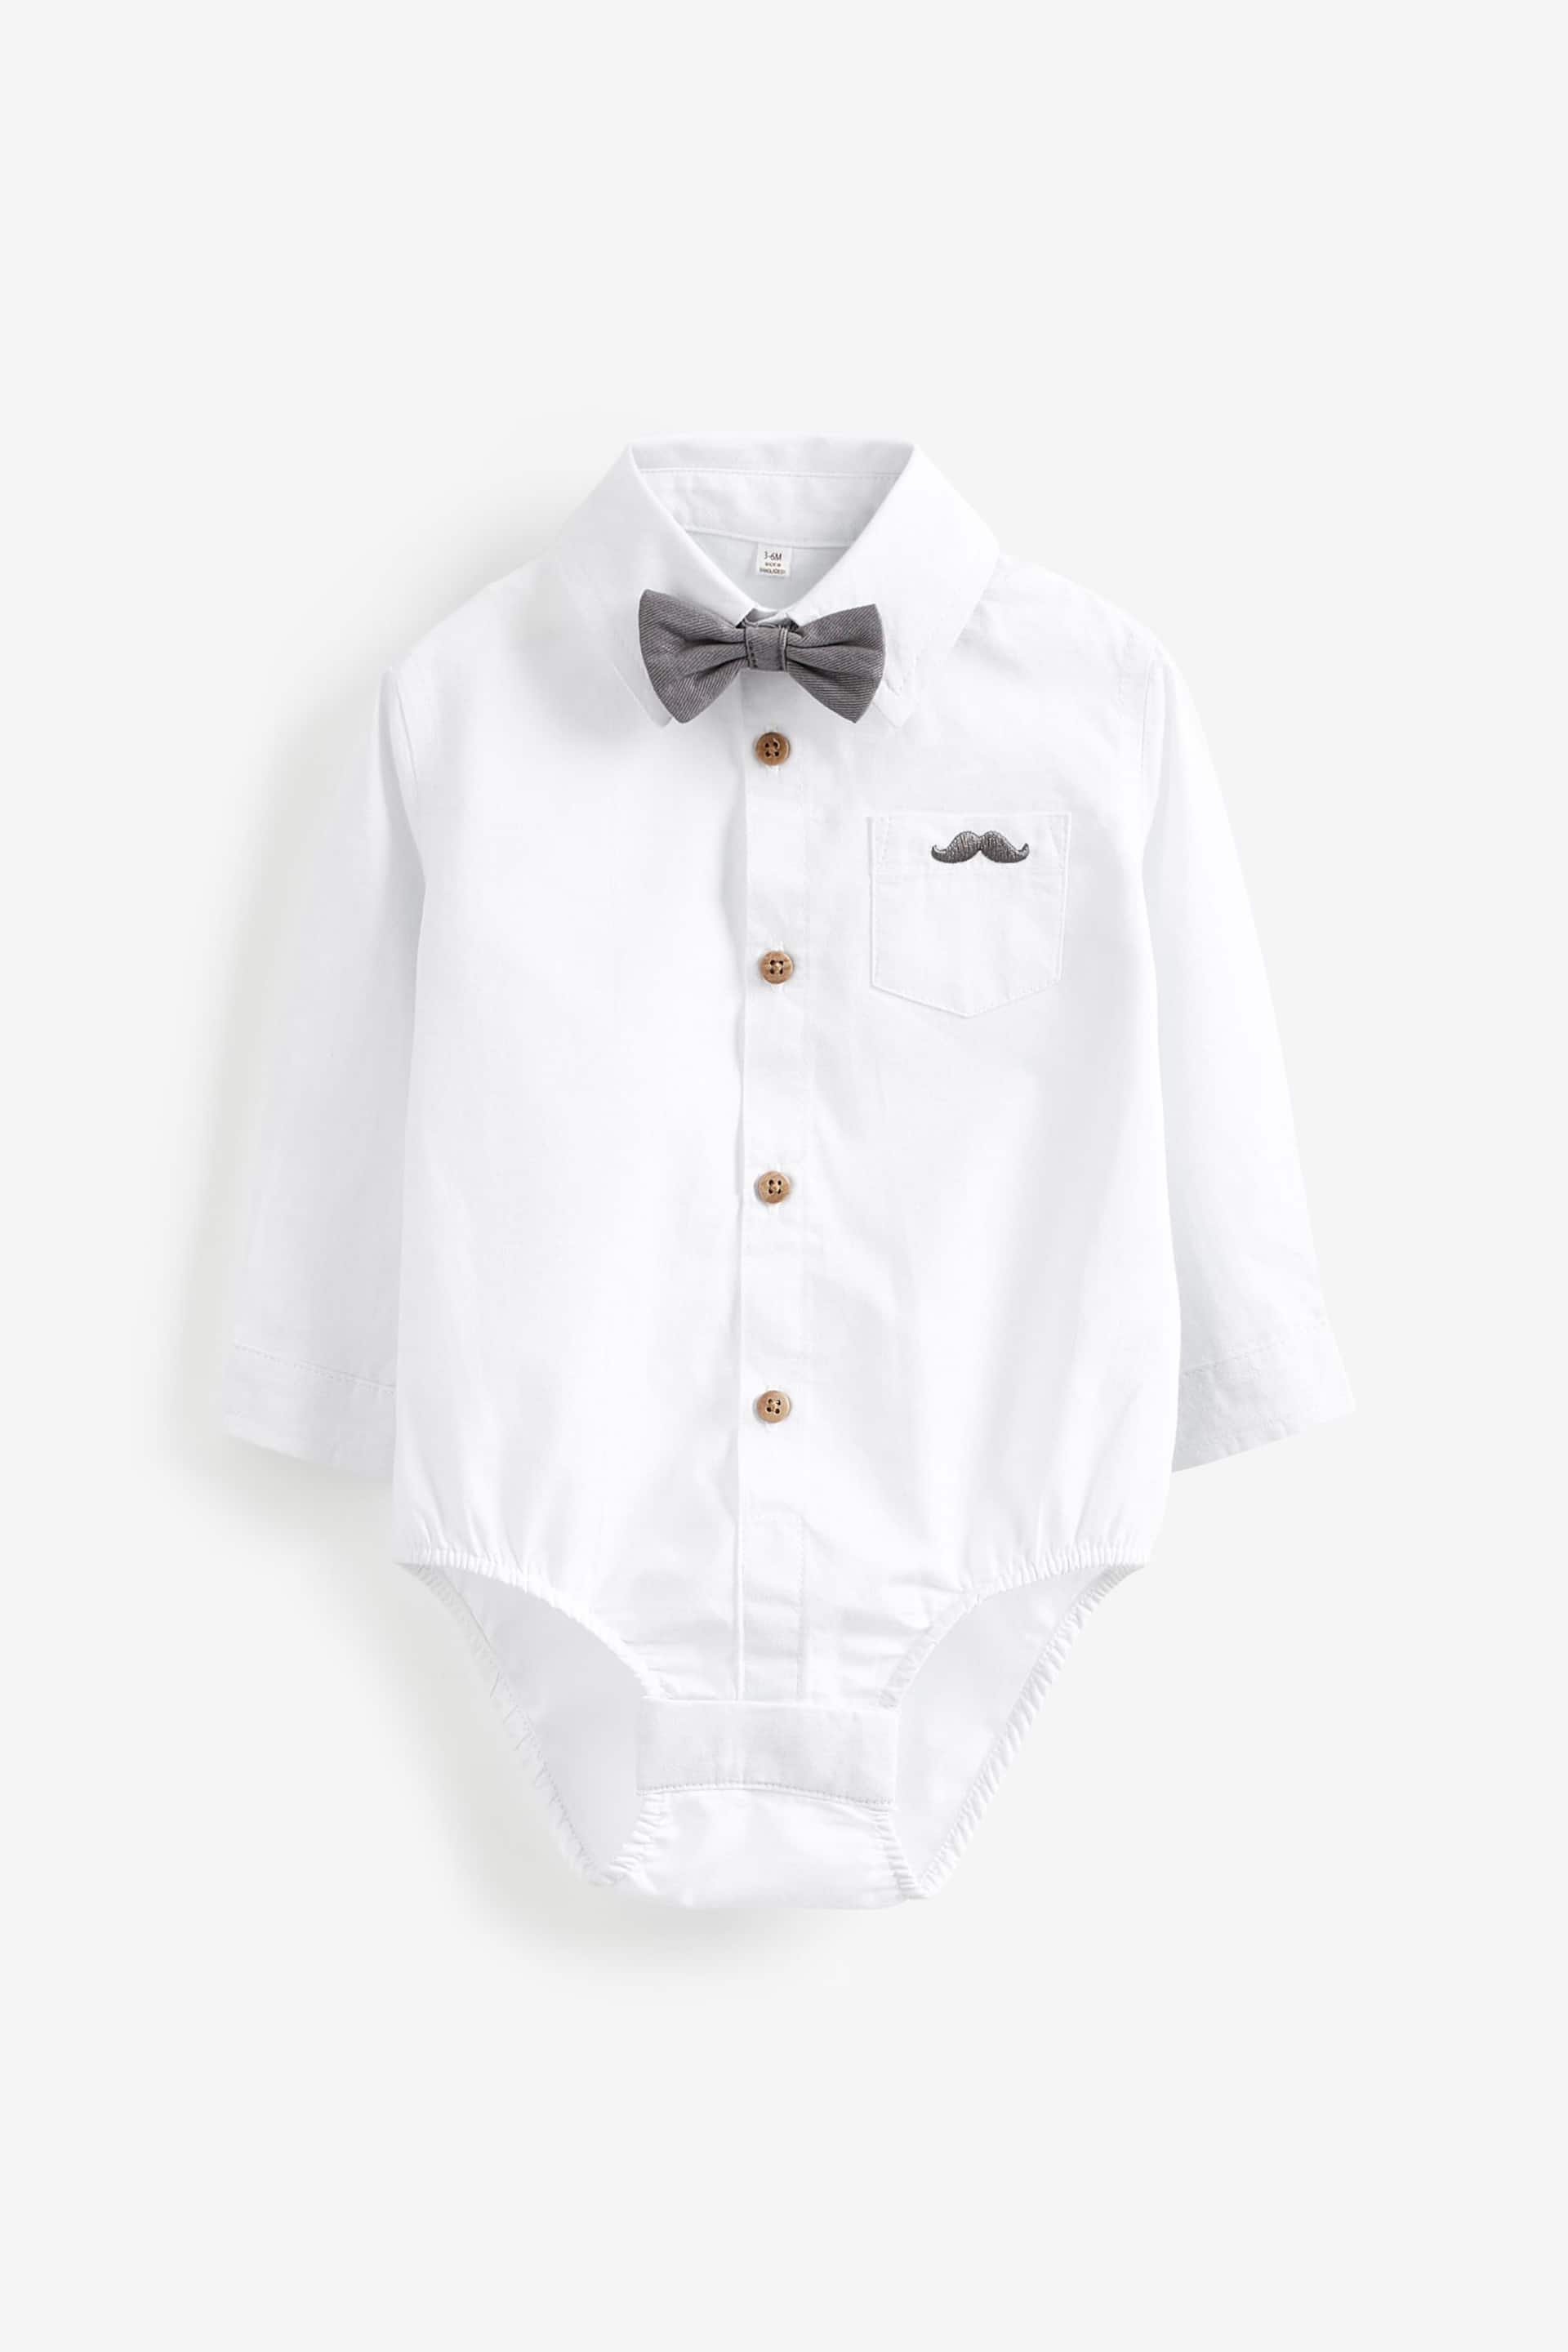 Little Gent Baby Mock Shirt Bodysuit and Braces Cotton Dungarees - Image 2 of 5